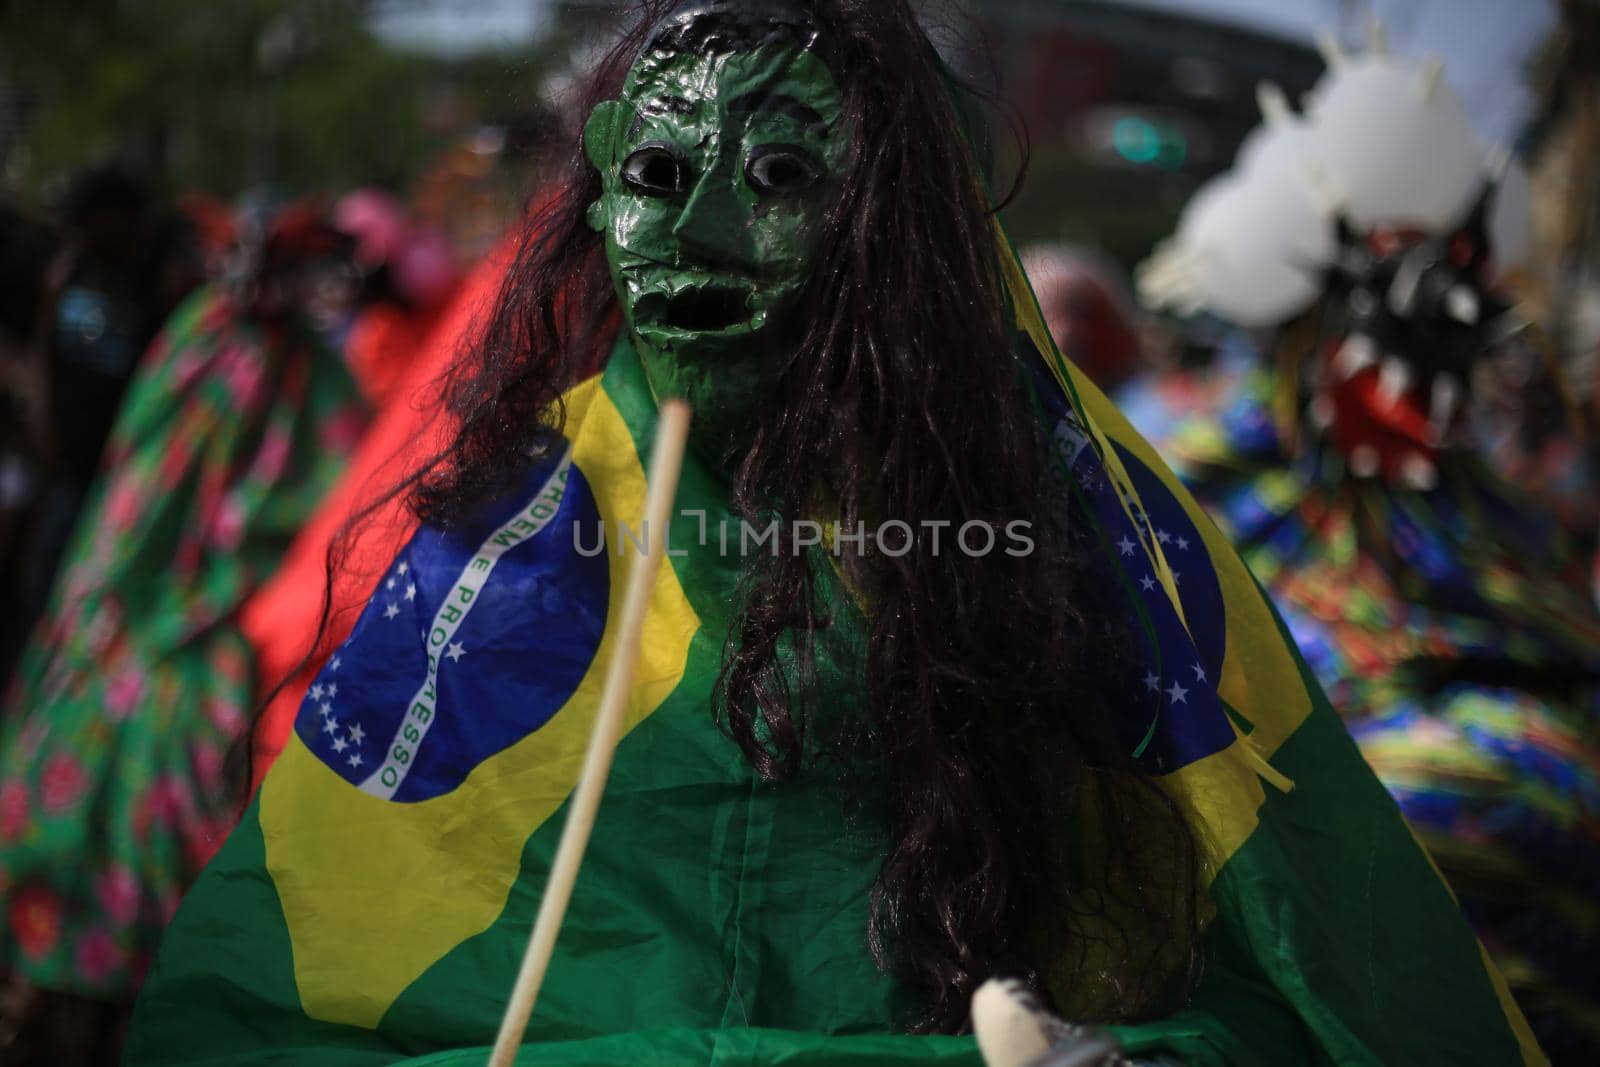 salvador, bahia / brazil - january 24, 2016: Members of the cultural group Caretas from Praia do Forte, are seen during a presentation at the Tororo Dike in Salvador.